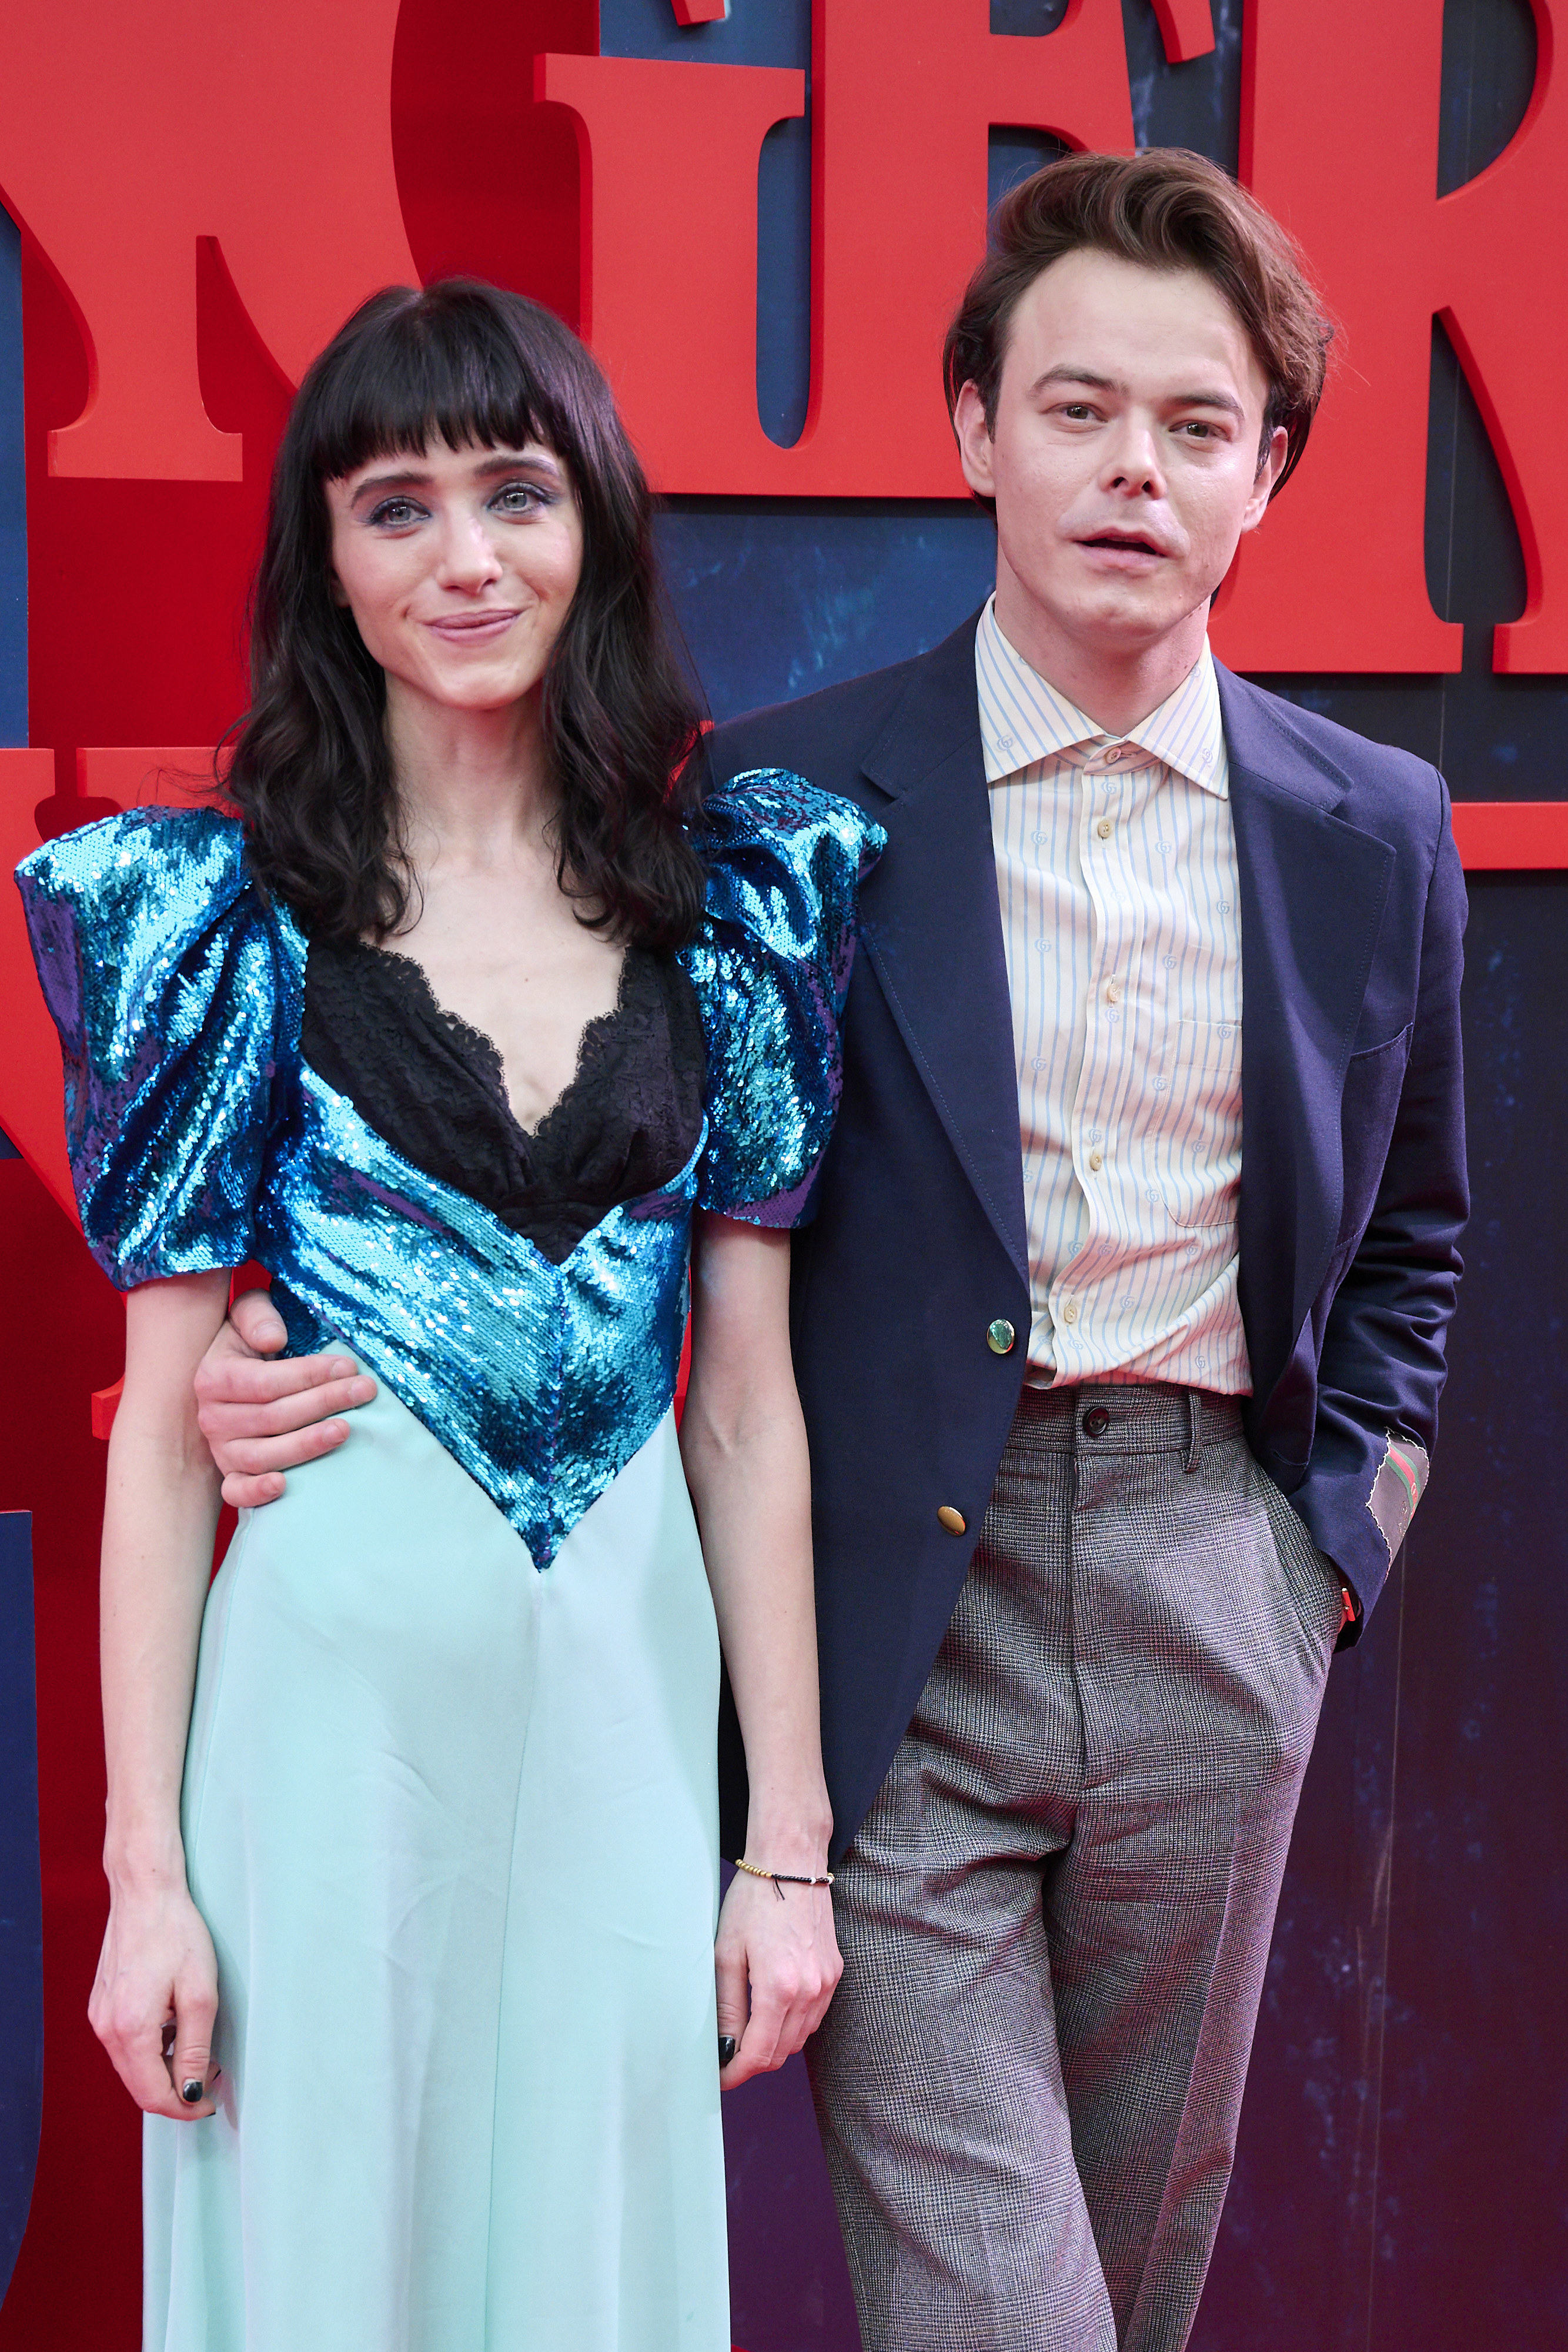 Natalie Dyer and Charlie Heaton at an event